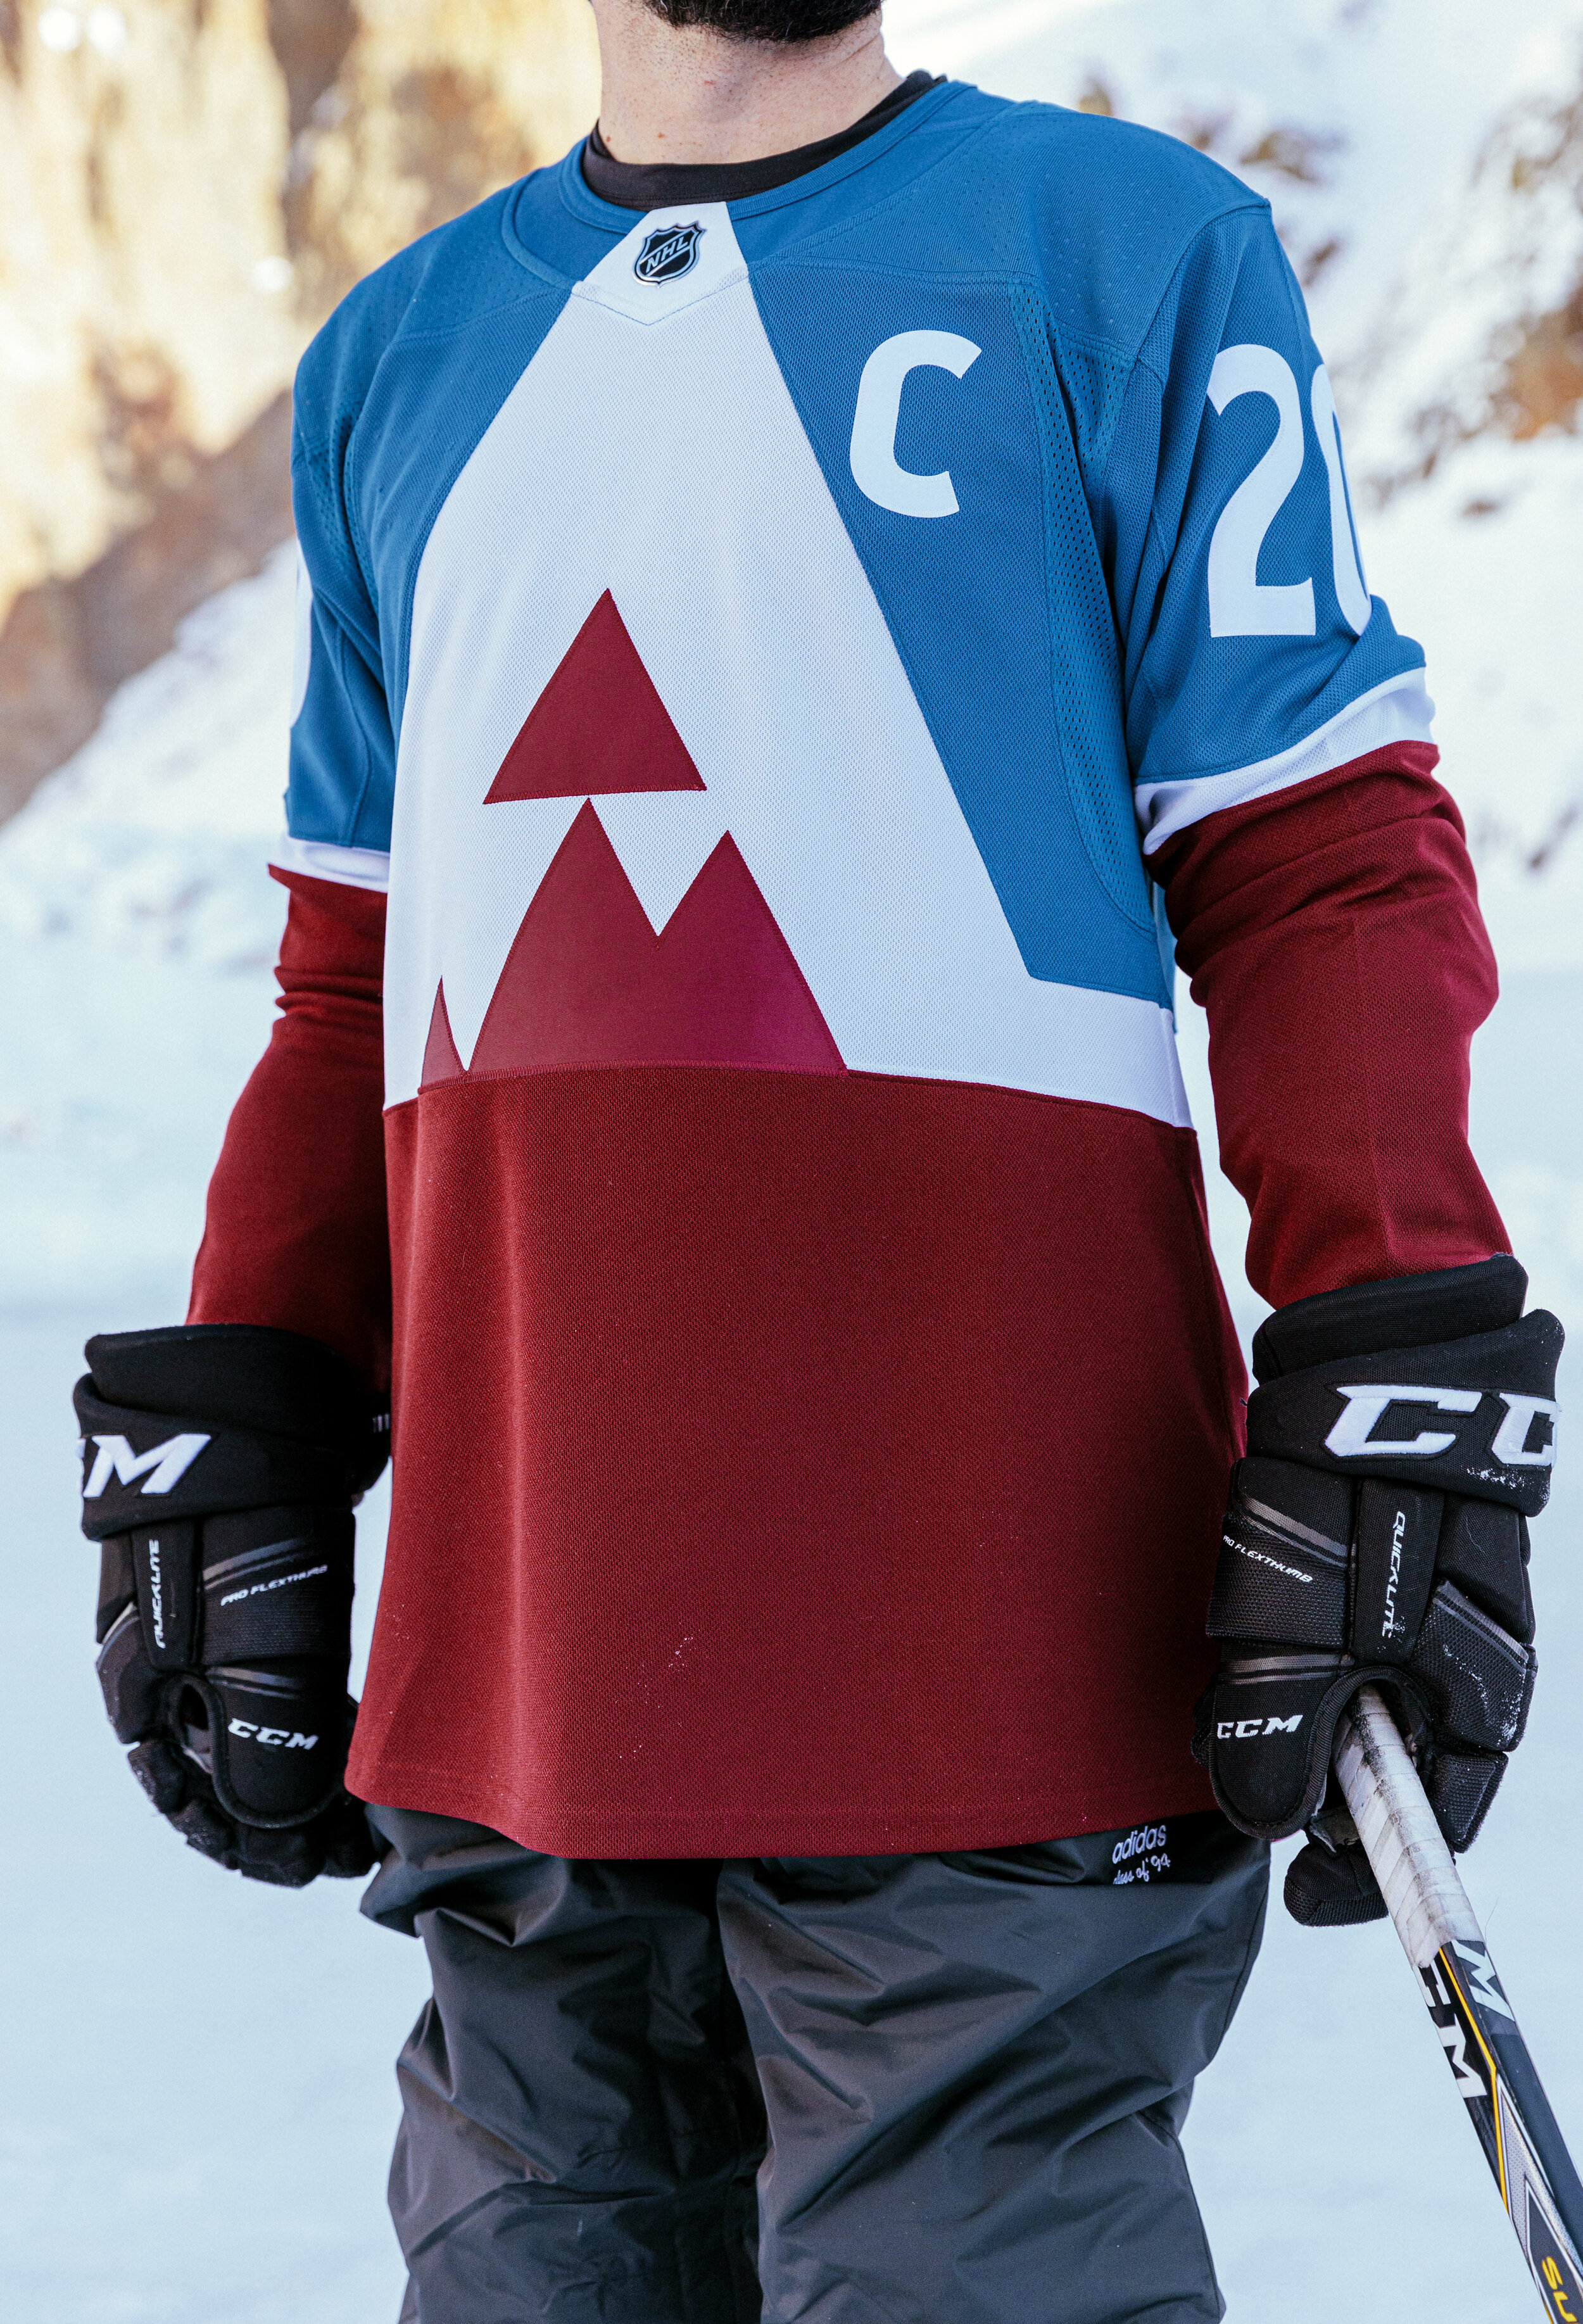 Stadium on X: The @Avalanche released their Adidas #StadiumSeries